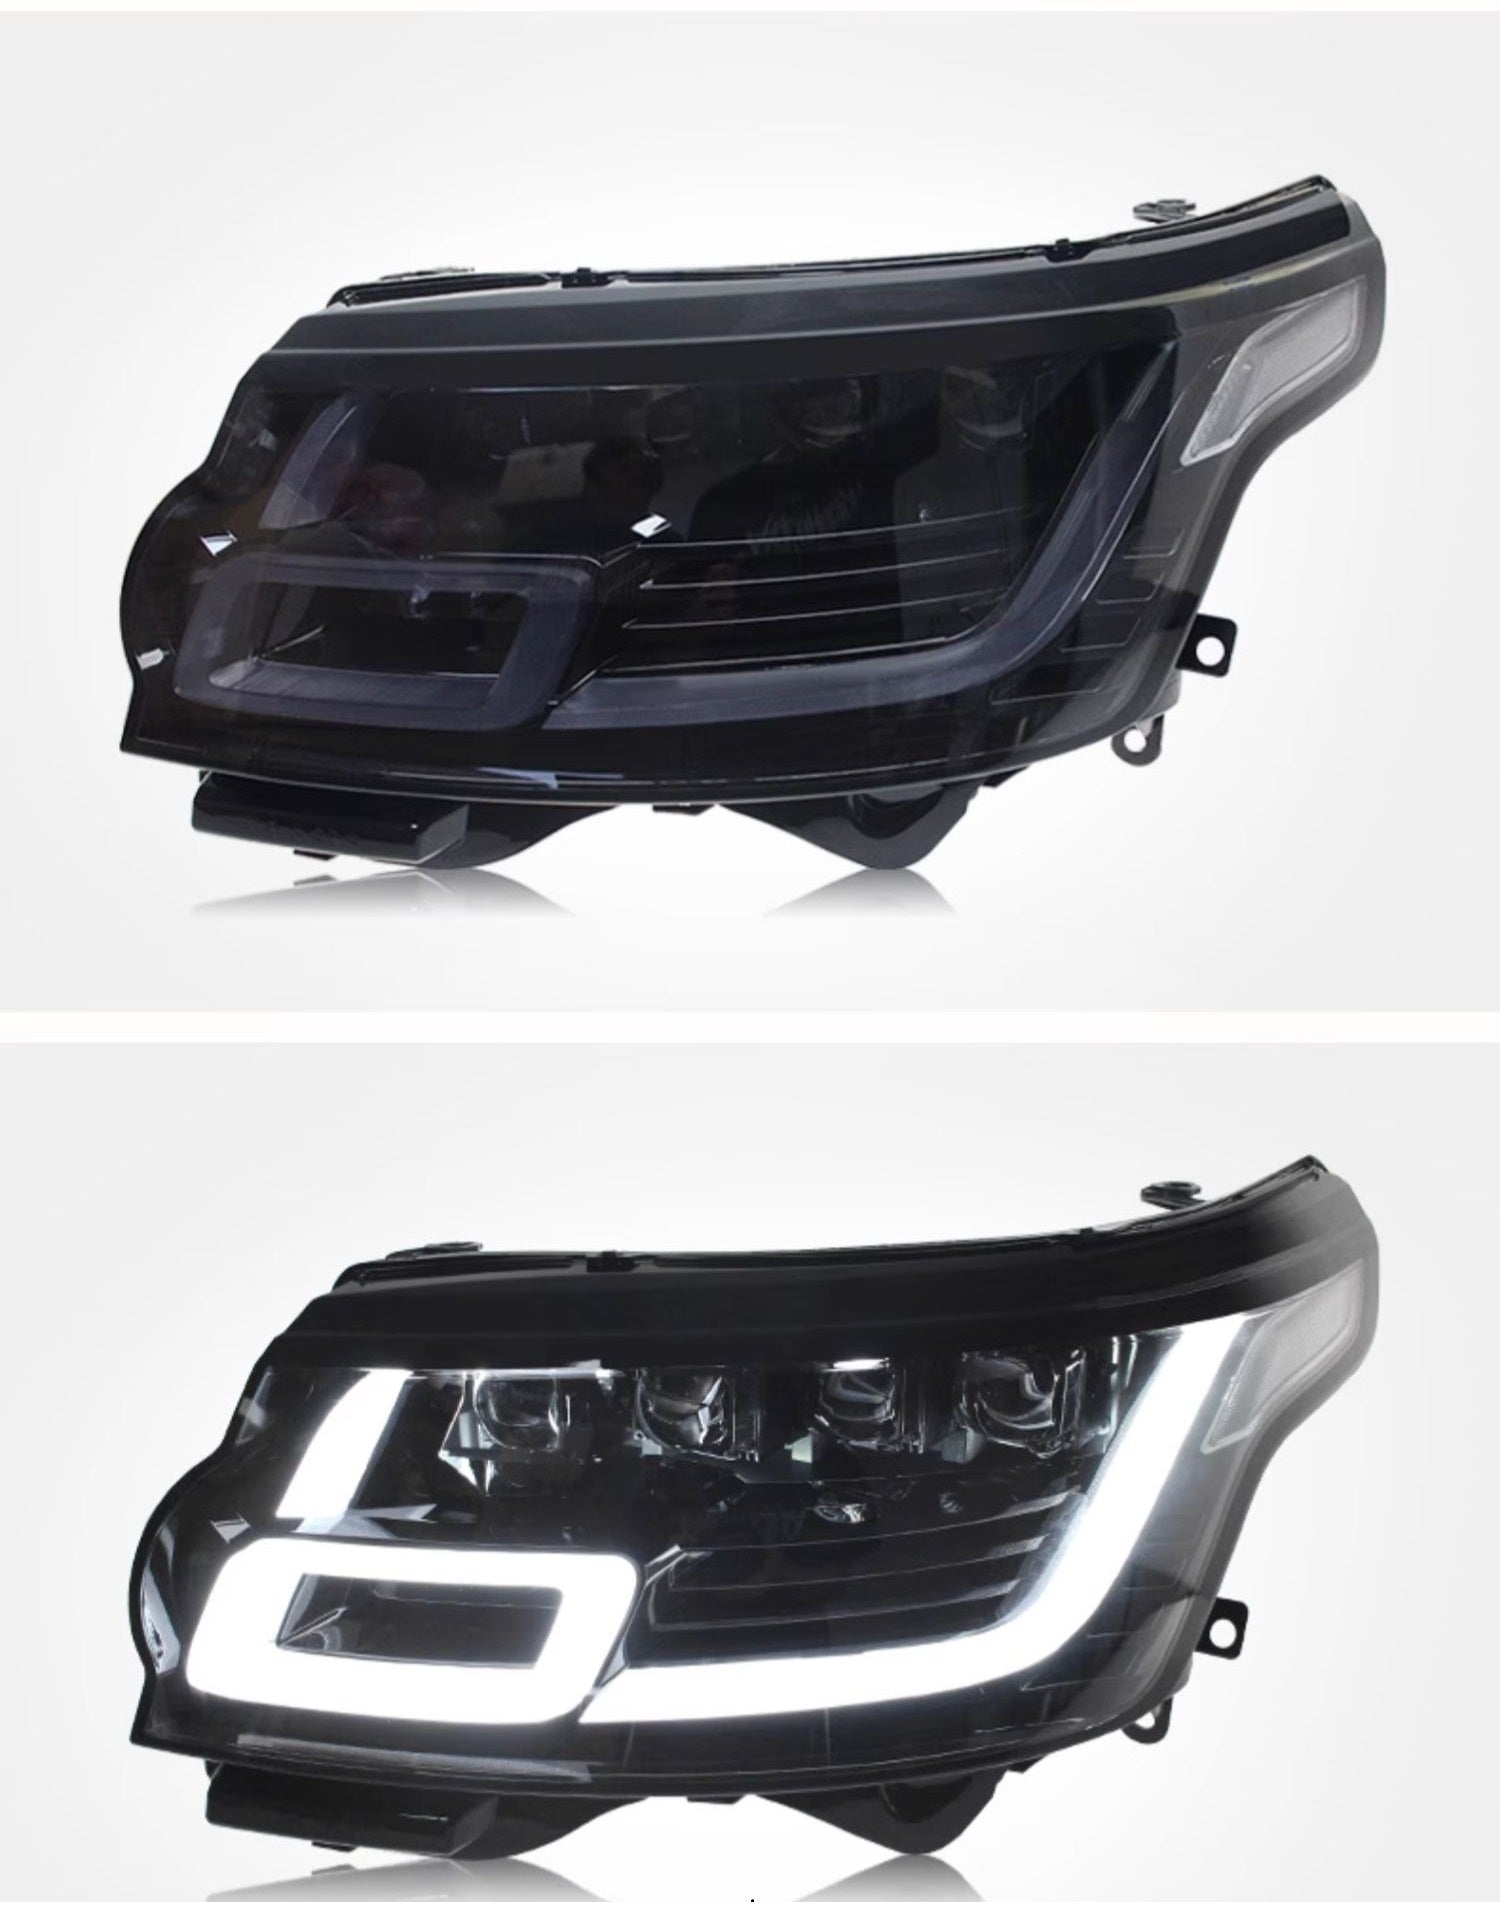 Enhance visibility and upgrade effortlessly with our plug-and-play LED headlights for Land Rover Range Rover Vogue L405 PreFacelift 2013-2017. No bumper replacements needed for a hassle-free installation, ensuring convenience and safety with advanced features like DRL, dynamic LED turning indicators, and multifunctional LED Matrix beams.